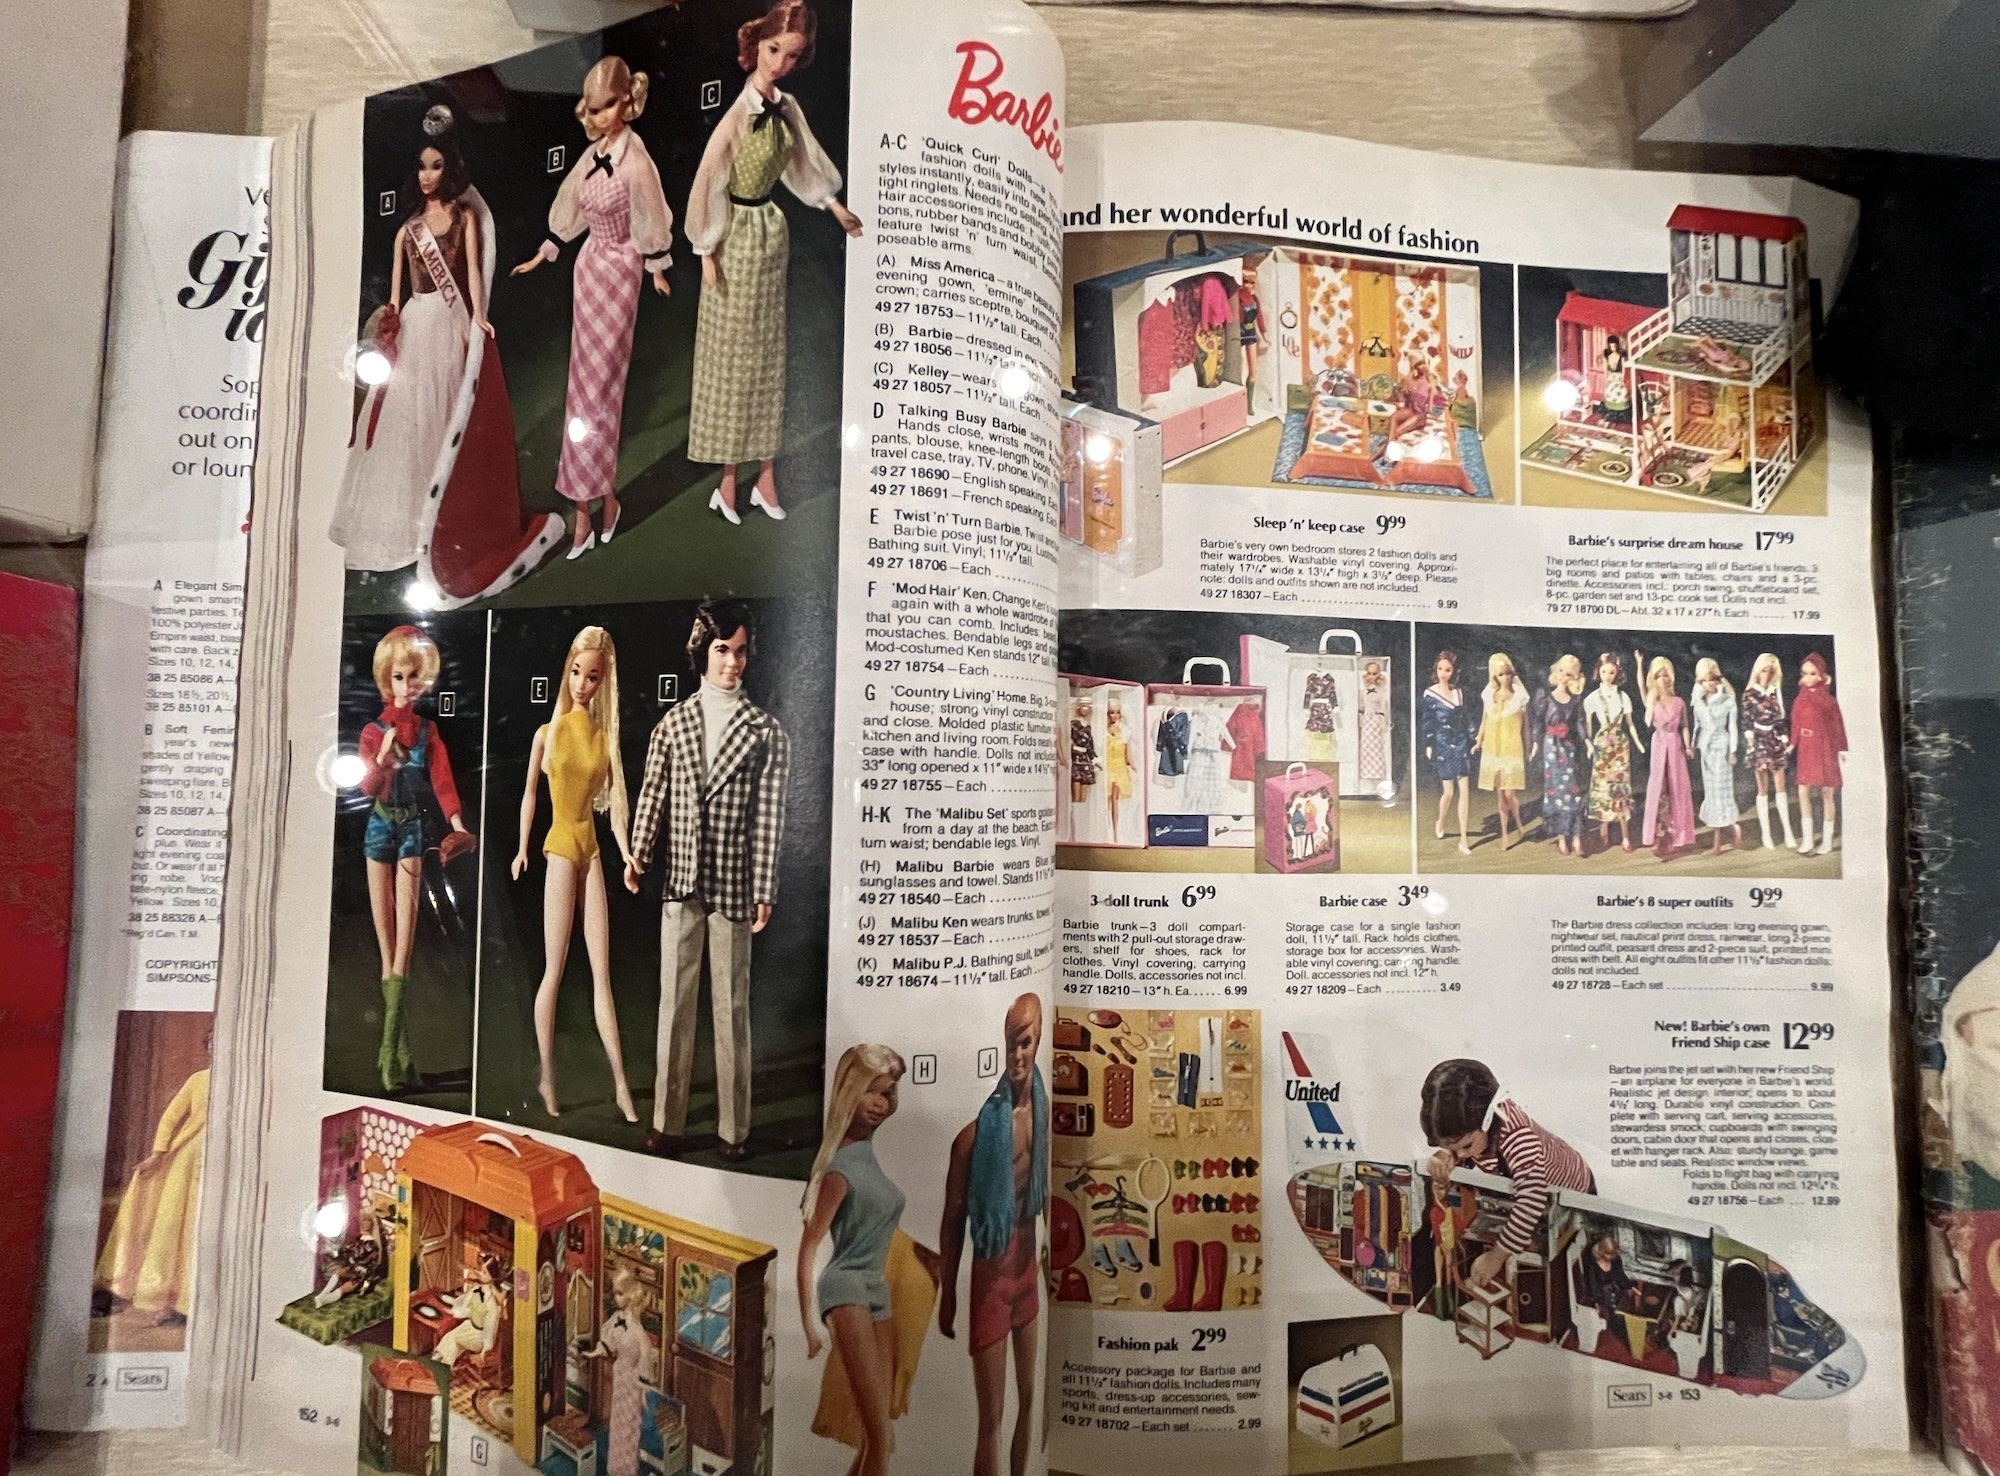 Open catalog with photos of Barbie and other toys.